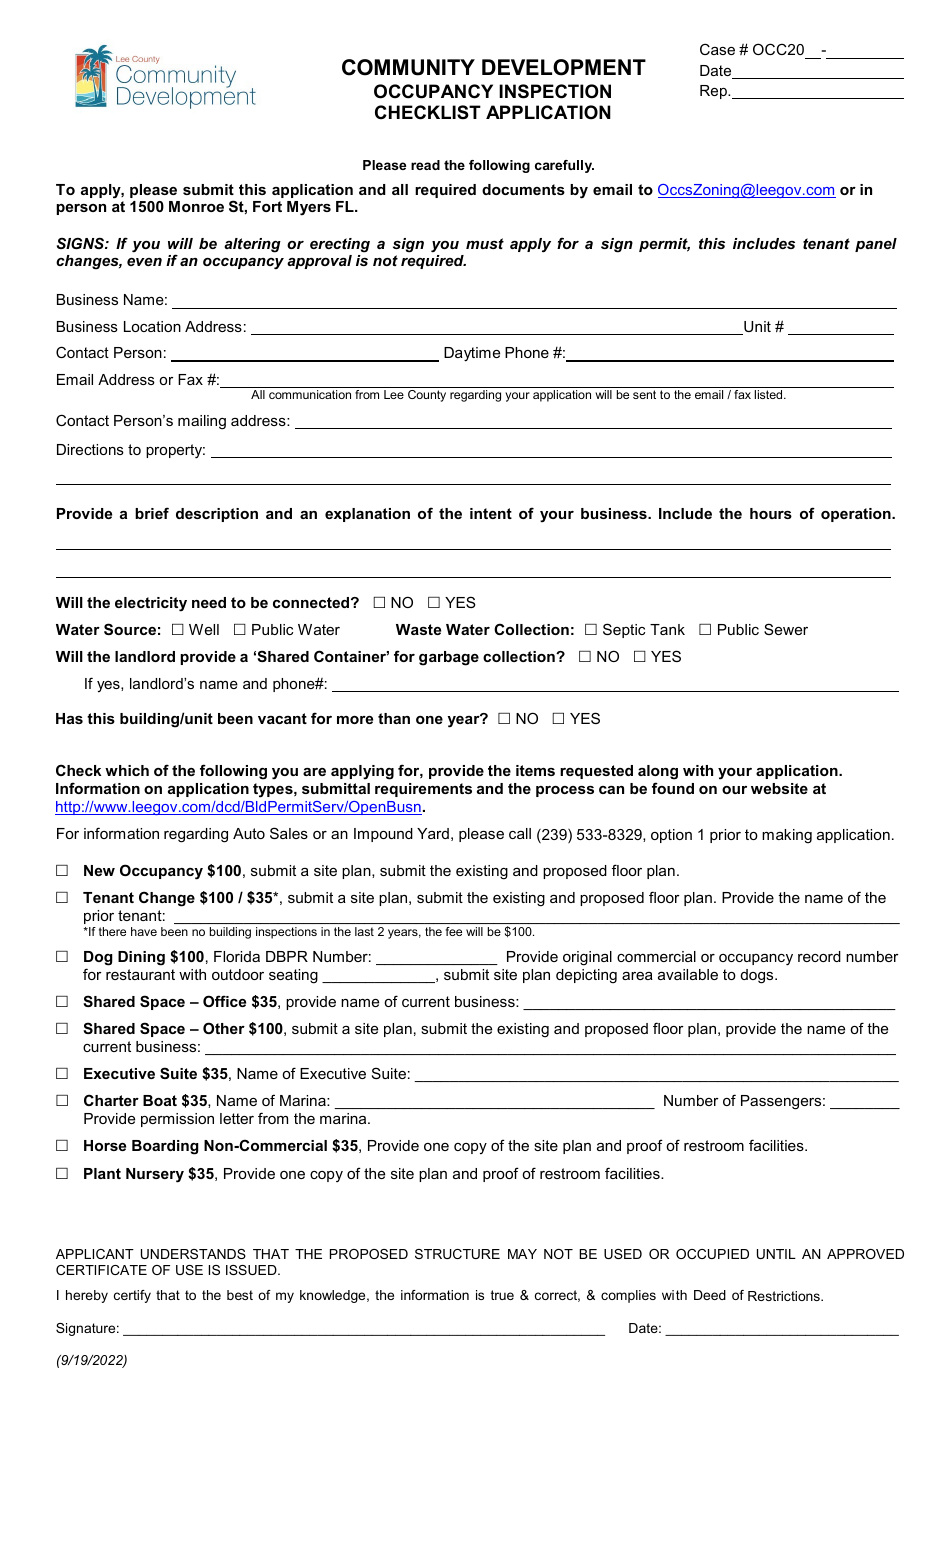 Occupancy Inspection Checklist Application - Lee County, Florida, Page 1